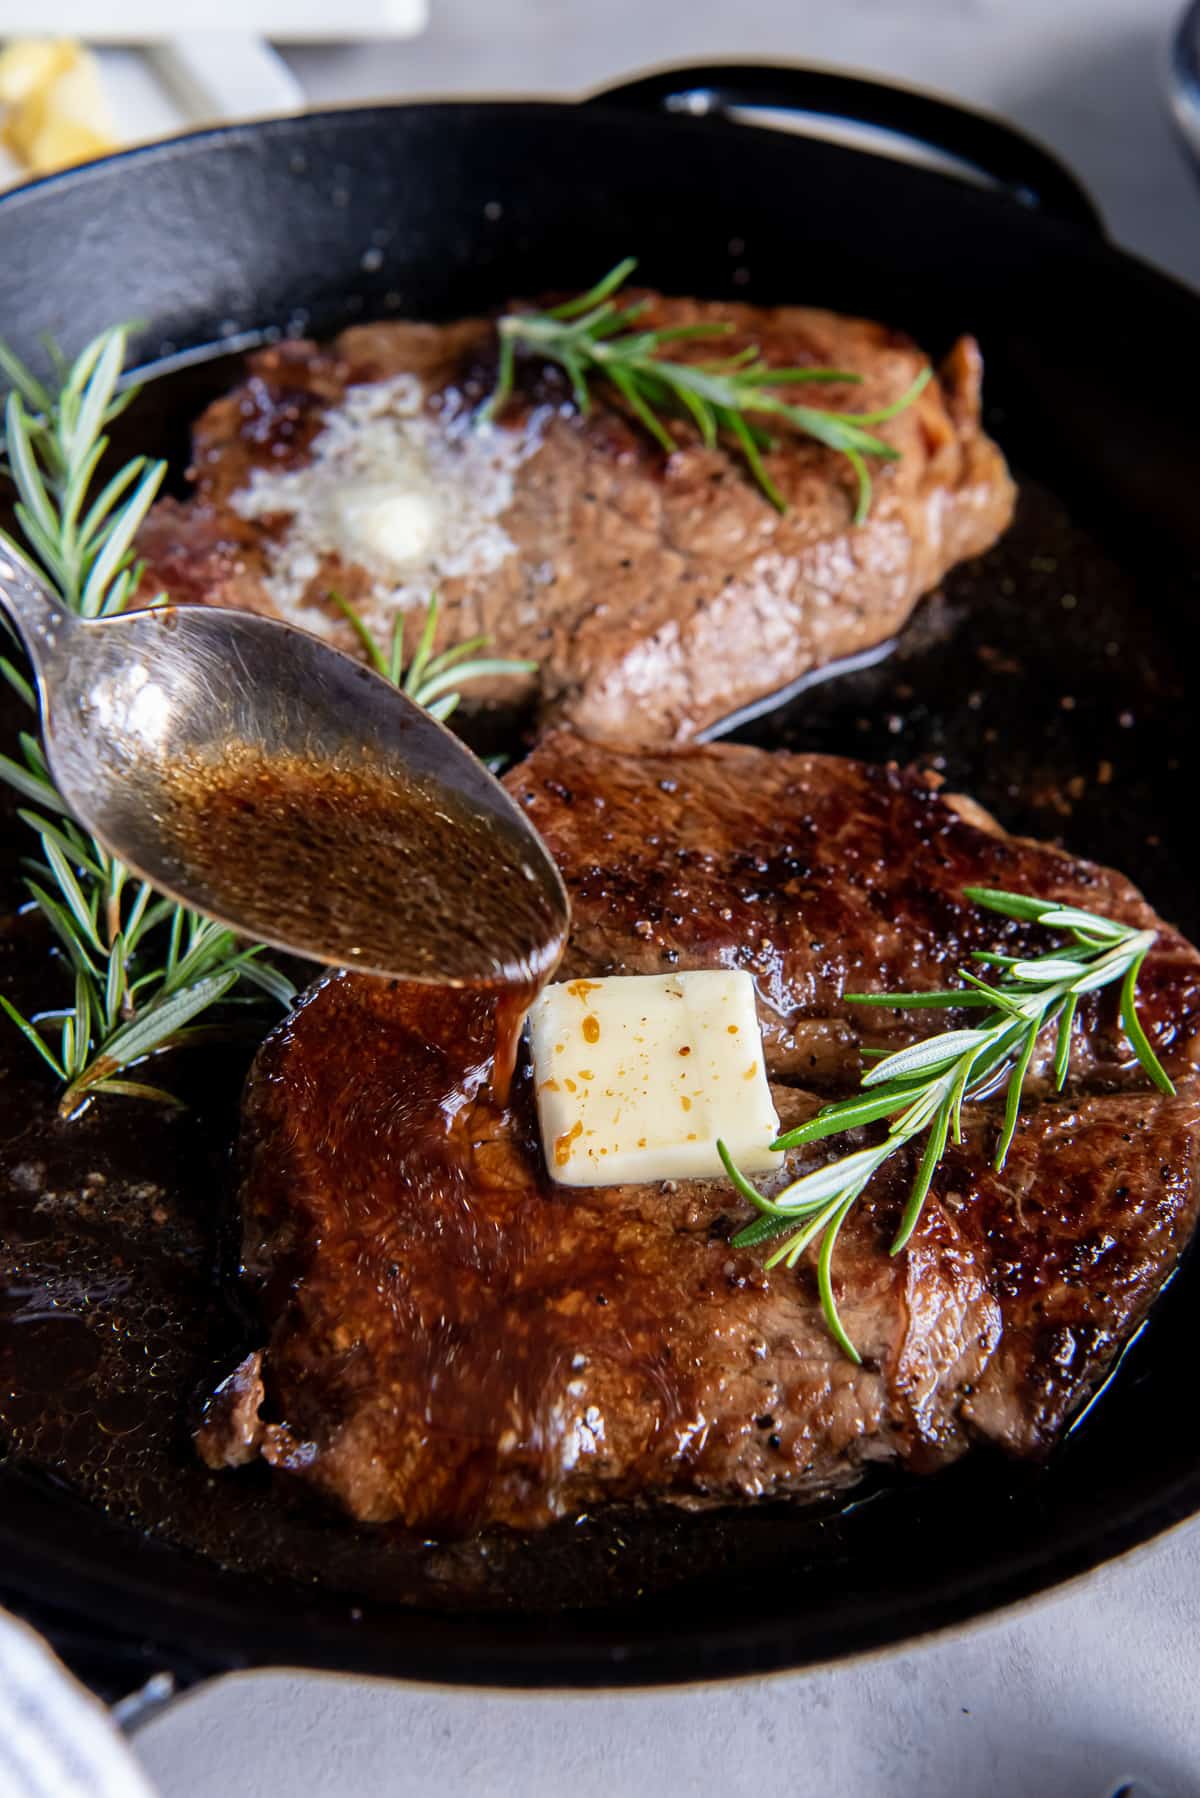 A spoon pouring pan juices over a sirloin steak in a cast iron skillet.